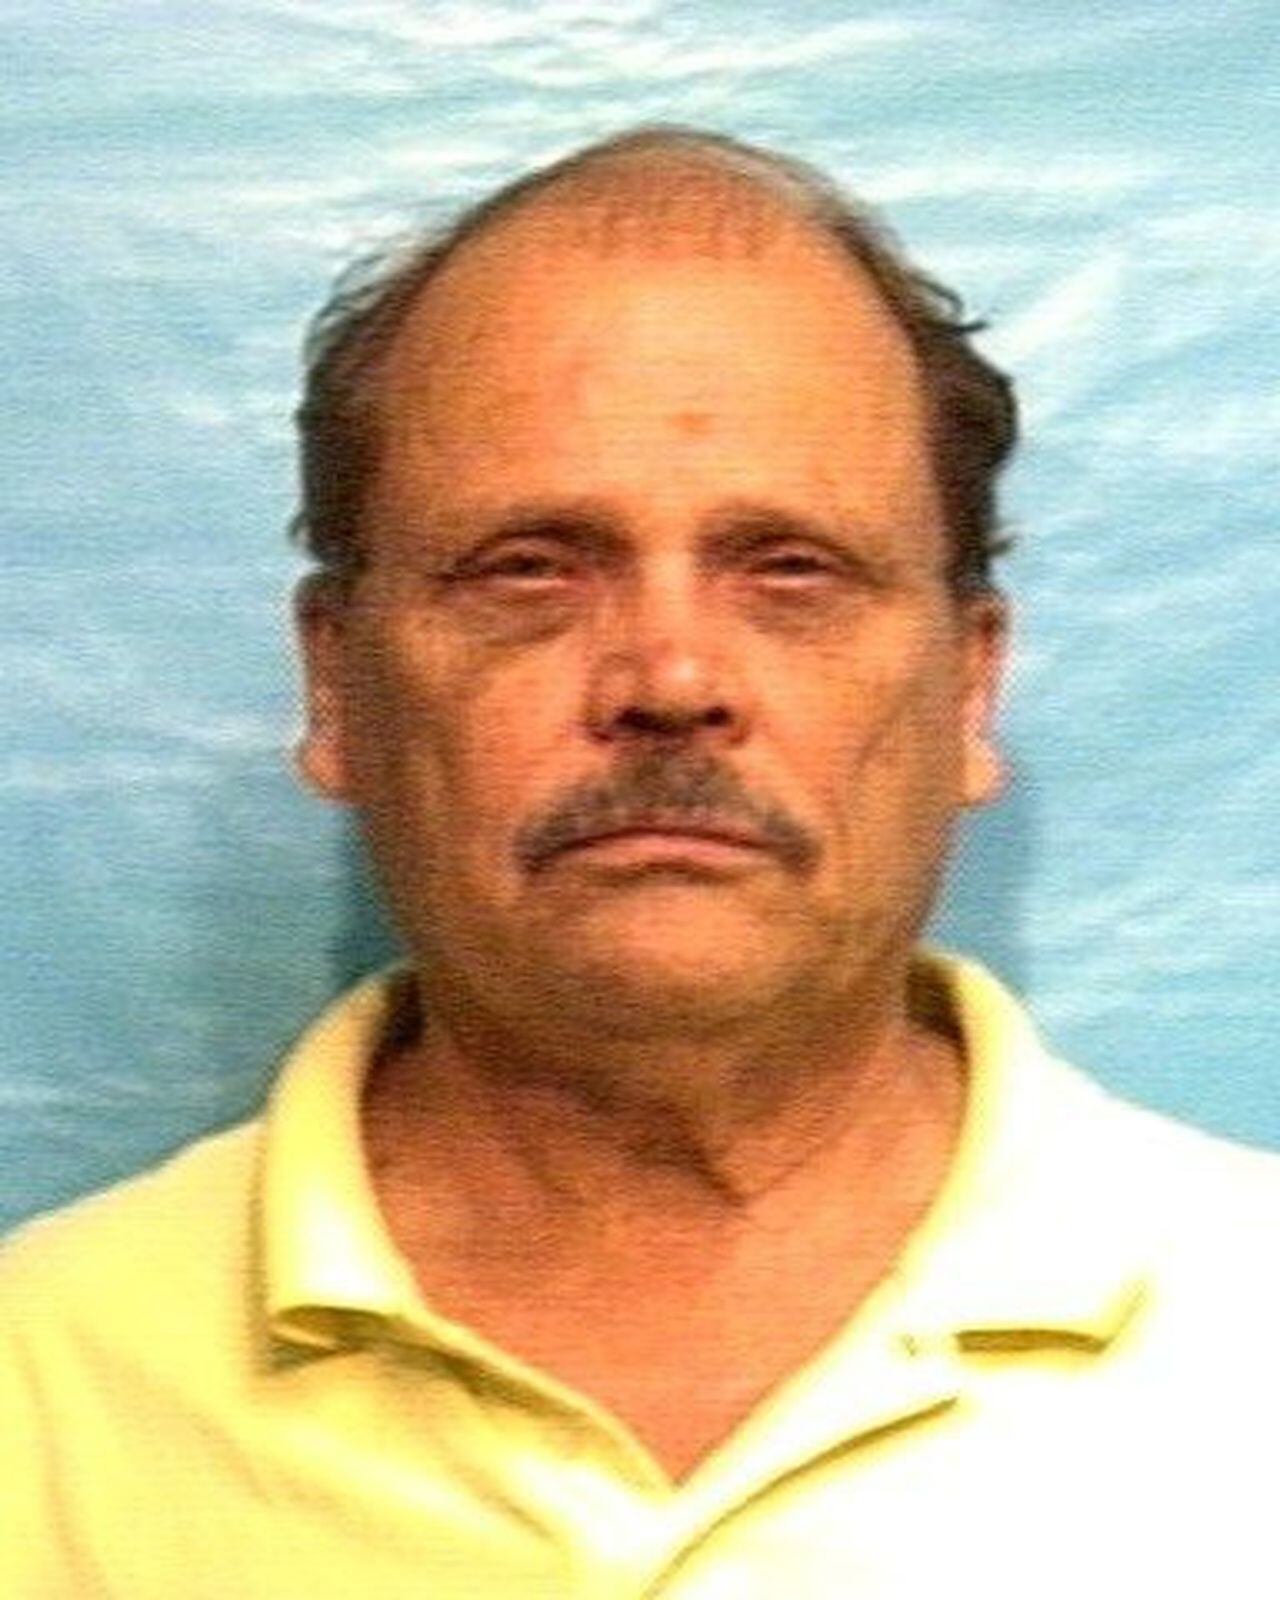 Daphne Man Resentenced In Sex Abuse Cases